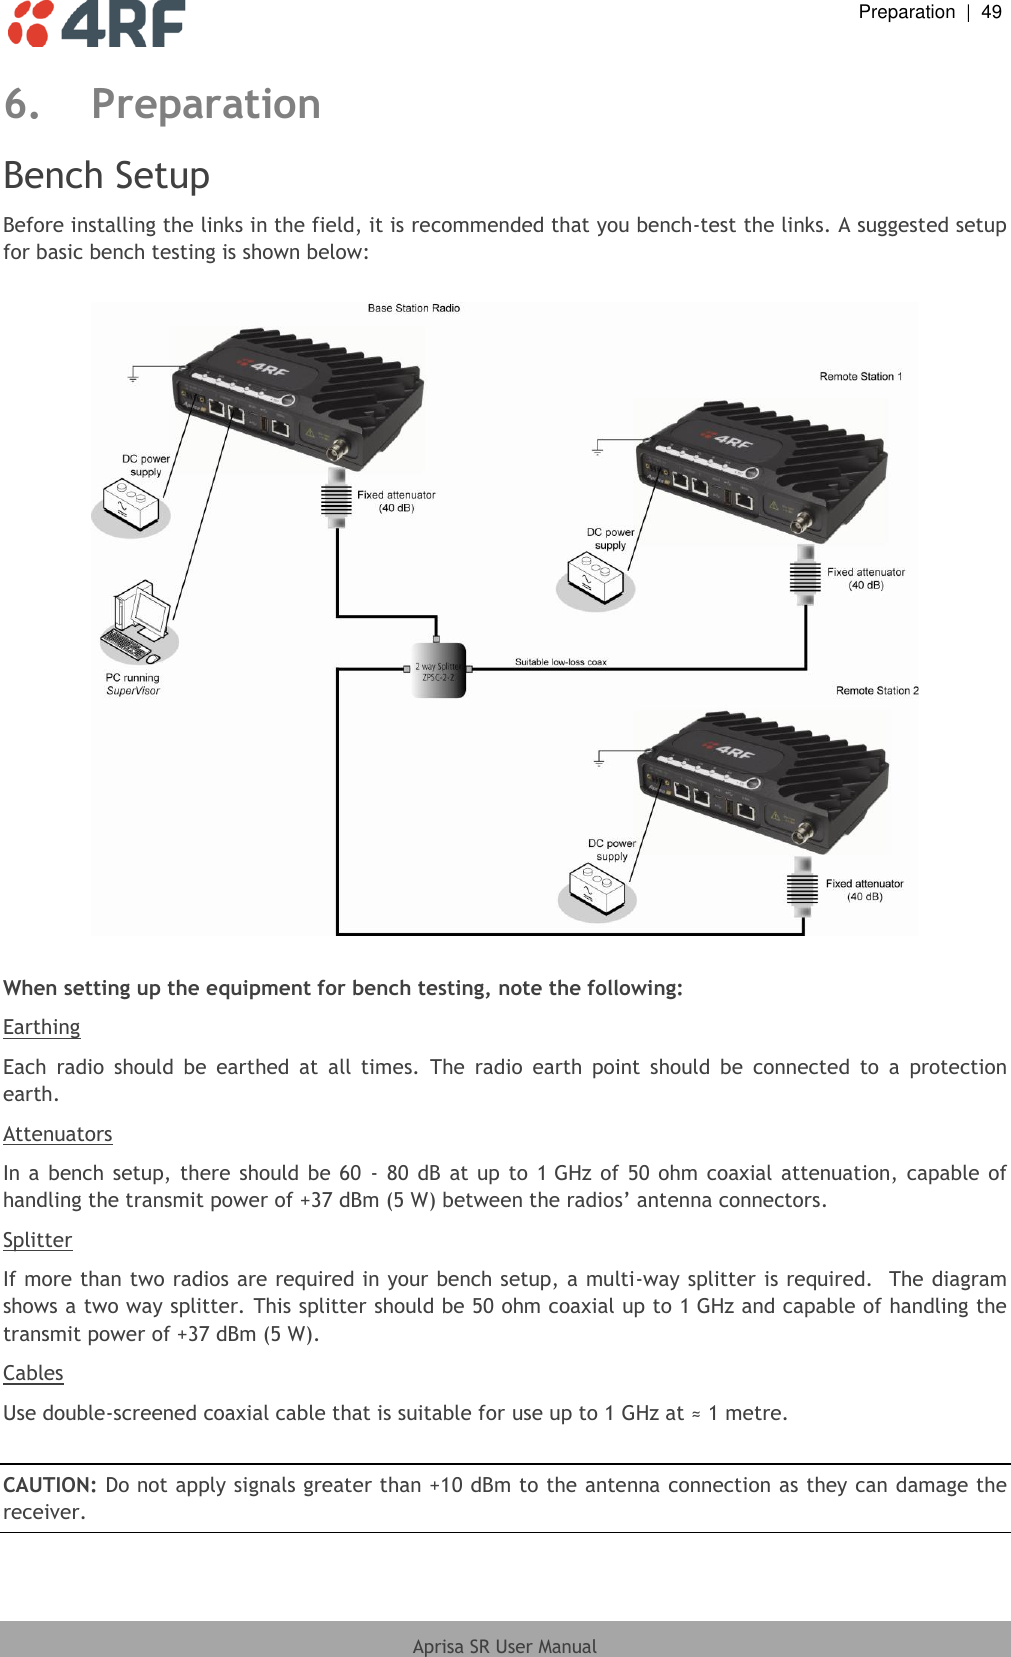  Preparation  |  49  Aprisa SR User Manual  6. Preparation Bench Setup Before installing the links in the field, it is recommended that you bench-test the links. A suggested setup for basic bench testing is shown below:    When setting up the equipment for bench testing, note the following: Earthing Each  radio  should  be  earthed  at  all  times.  The  radio  earth  point  should  be  connected  to  a  protection earth. Attenuators In a  bench setup, there should  be 60  -  80  dB at  up to  1 GHz  of 50 ohm coaxial attenuation,  capable  of handling the transmit power of +37 dBm (5 W) between the radios’ antenna connectors. Splitter If more than two radios are required in your bench setup, a multi-way splitter is required.  The diagram shows a two way splitter. This splitter should be 50 ohm coaxial up to 1 GHz and capable of handling the transmit power of +37 dBm (5 W). Cables Use double-screened coaxial cable that is suitable for use up to 1 GHz at ≈ 1 metre.  CAUTION: Do not apply signals greater than +10 dBm to the antenna connection as they can damage the receiver. 